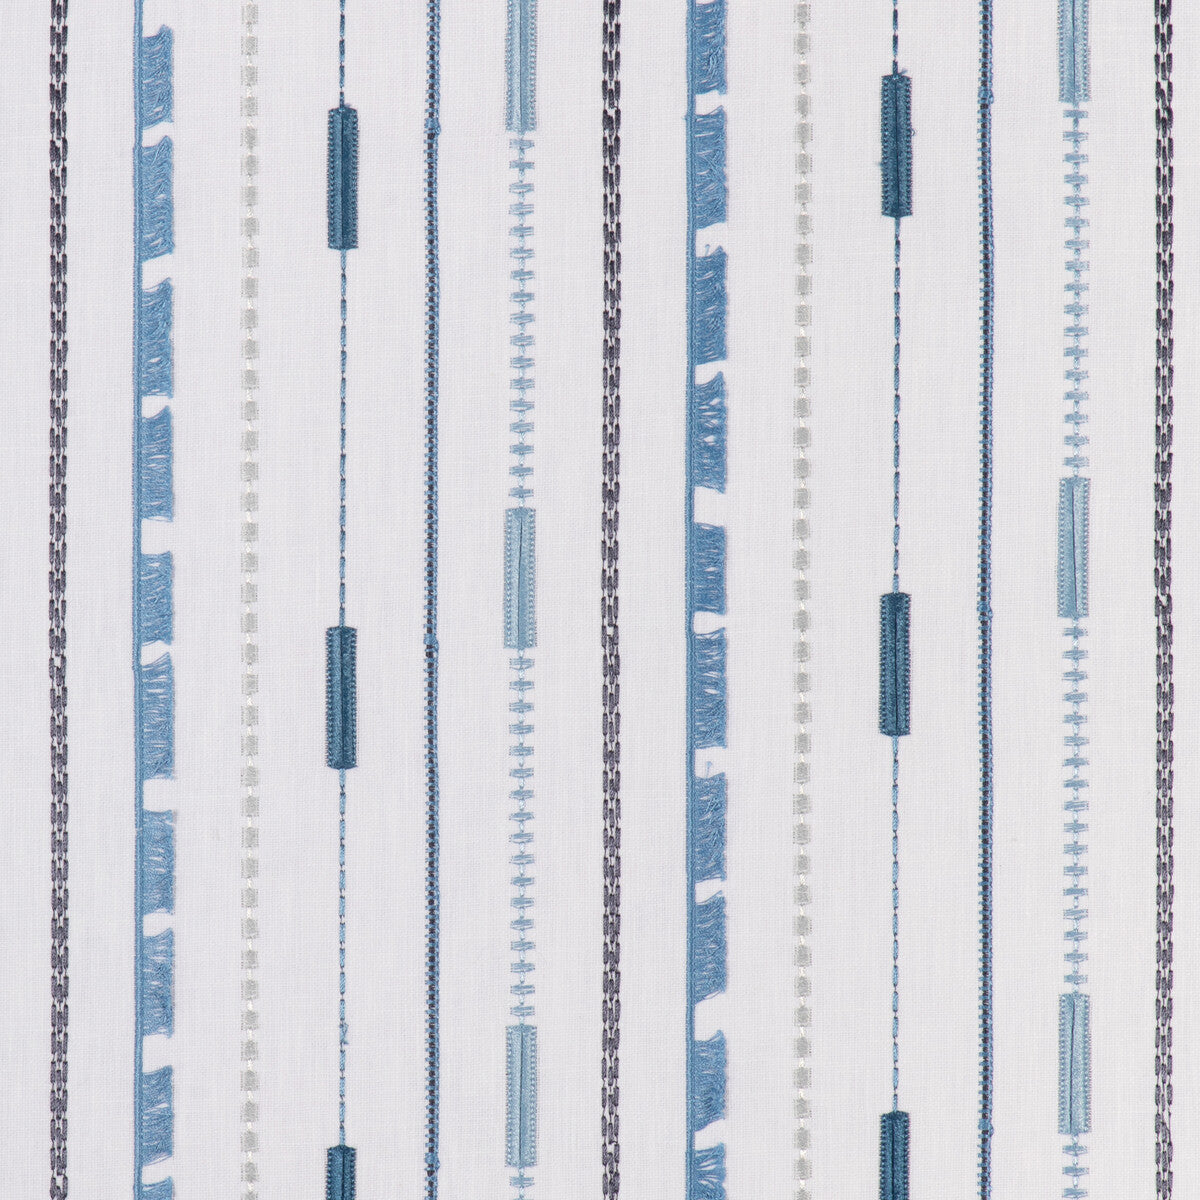 Kravet Basics fabric in 37163-51 color - pattern 37163.51.0 - by Kravet Basics in the Modern Embroideries III collection